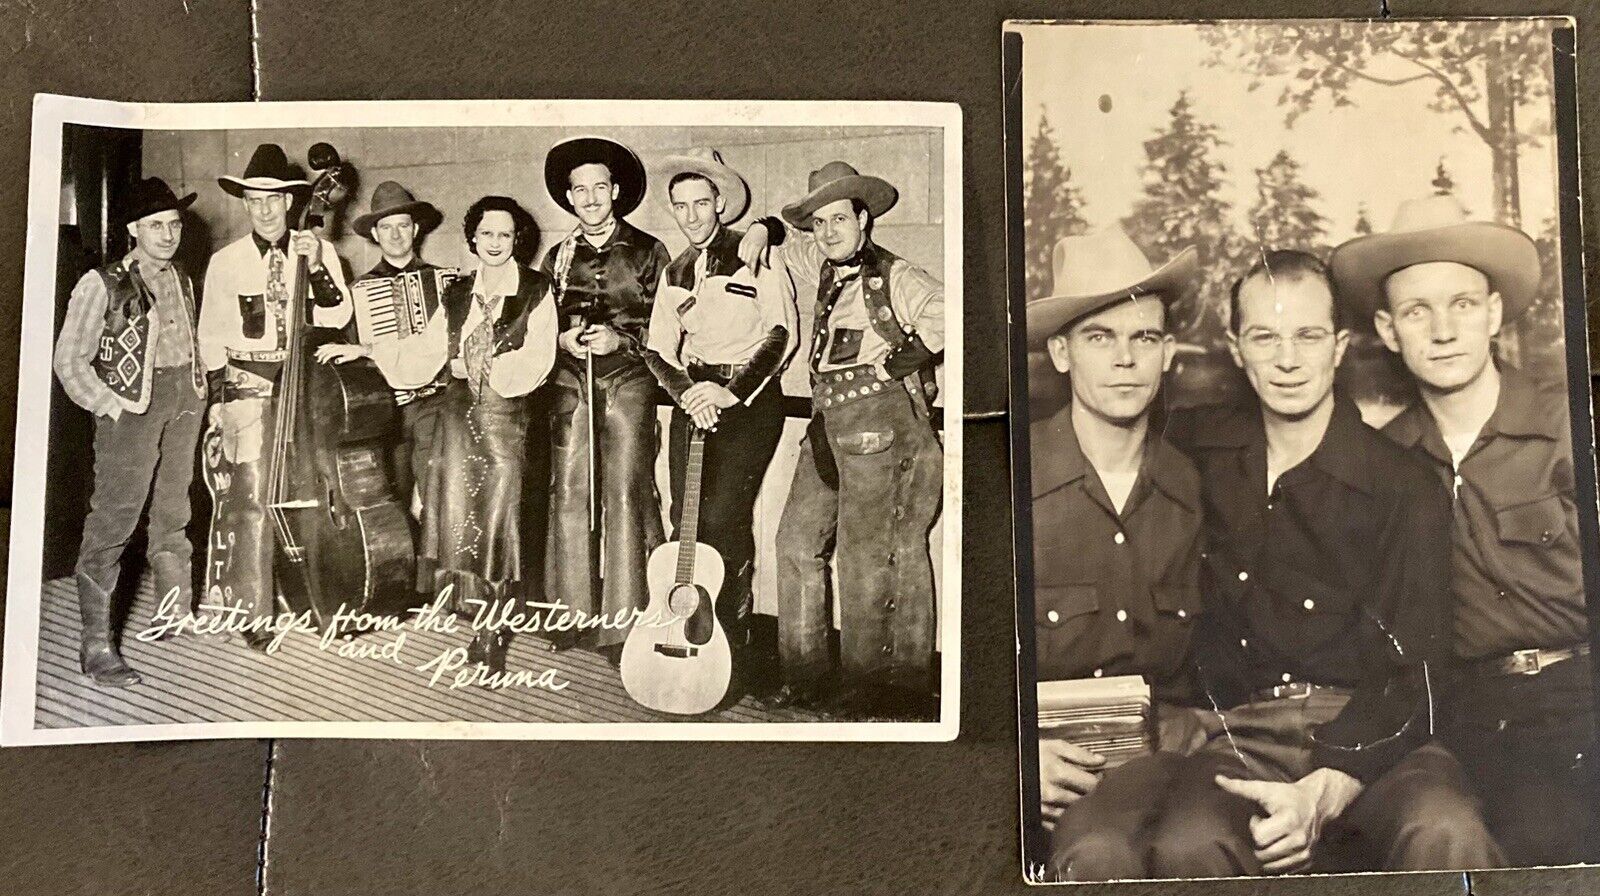 1930s Photos of a Cowboy Band with Guitar Accordion Bass And Photo Of 3 Cowboys